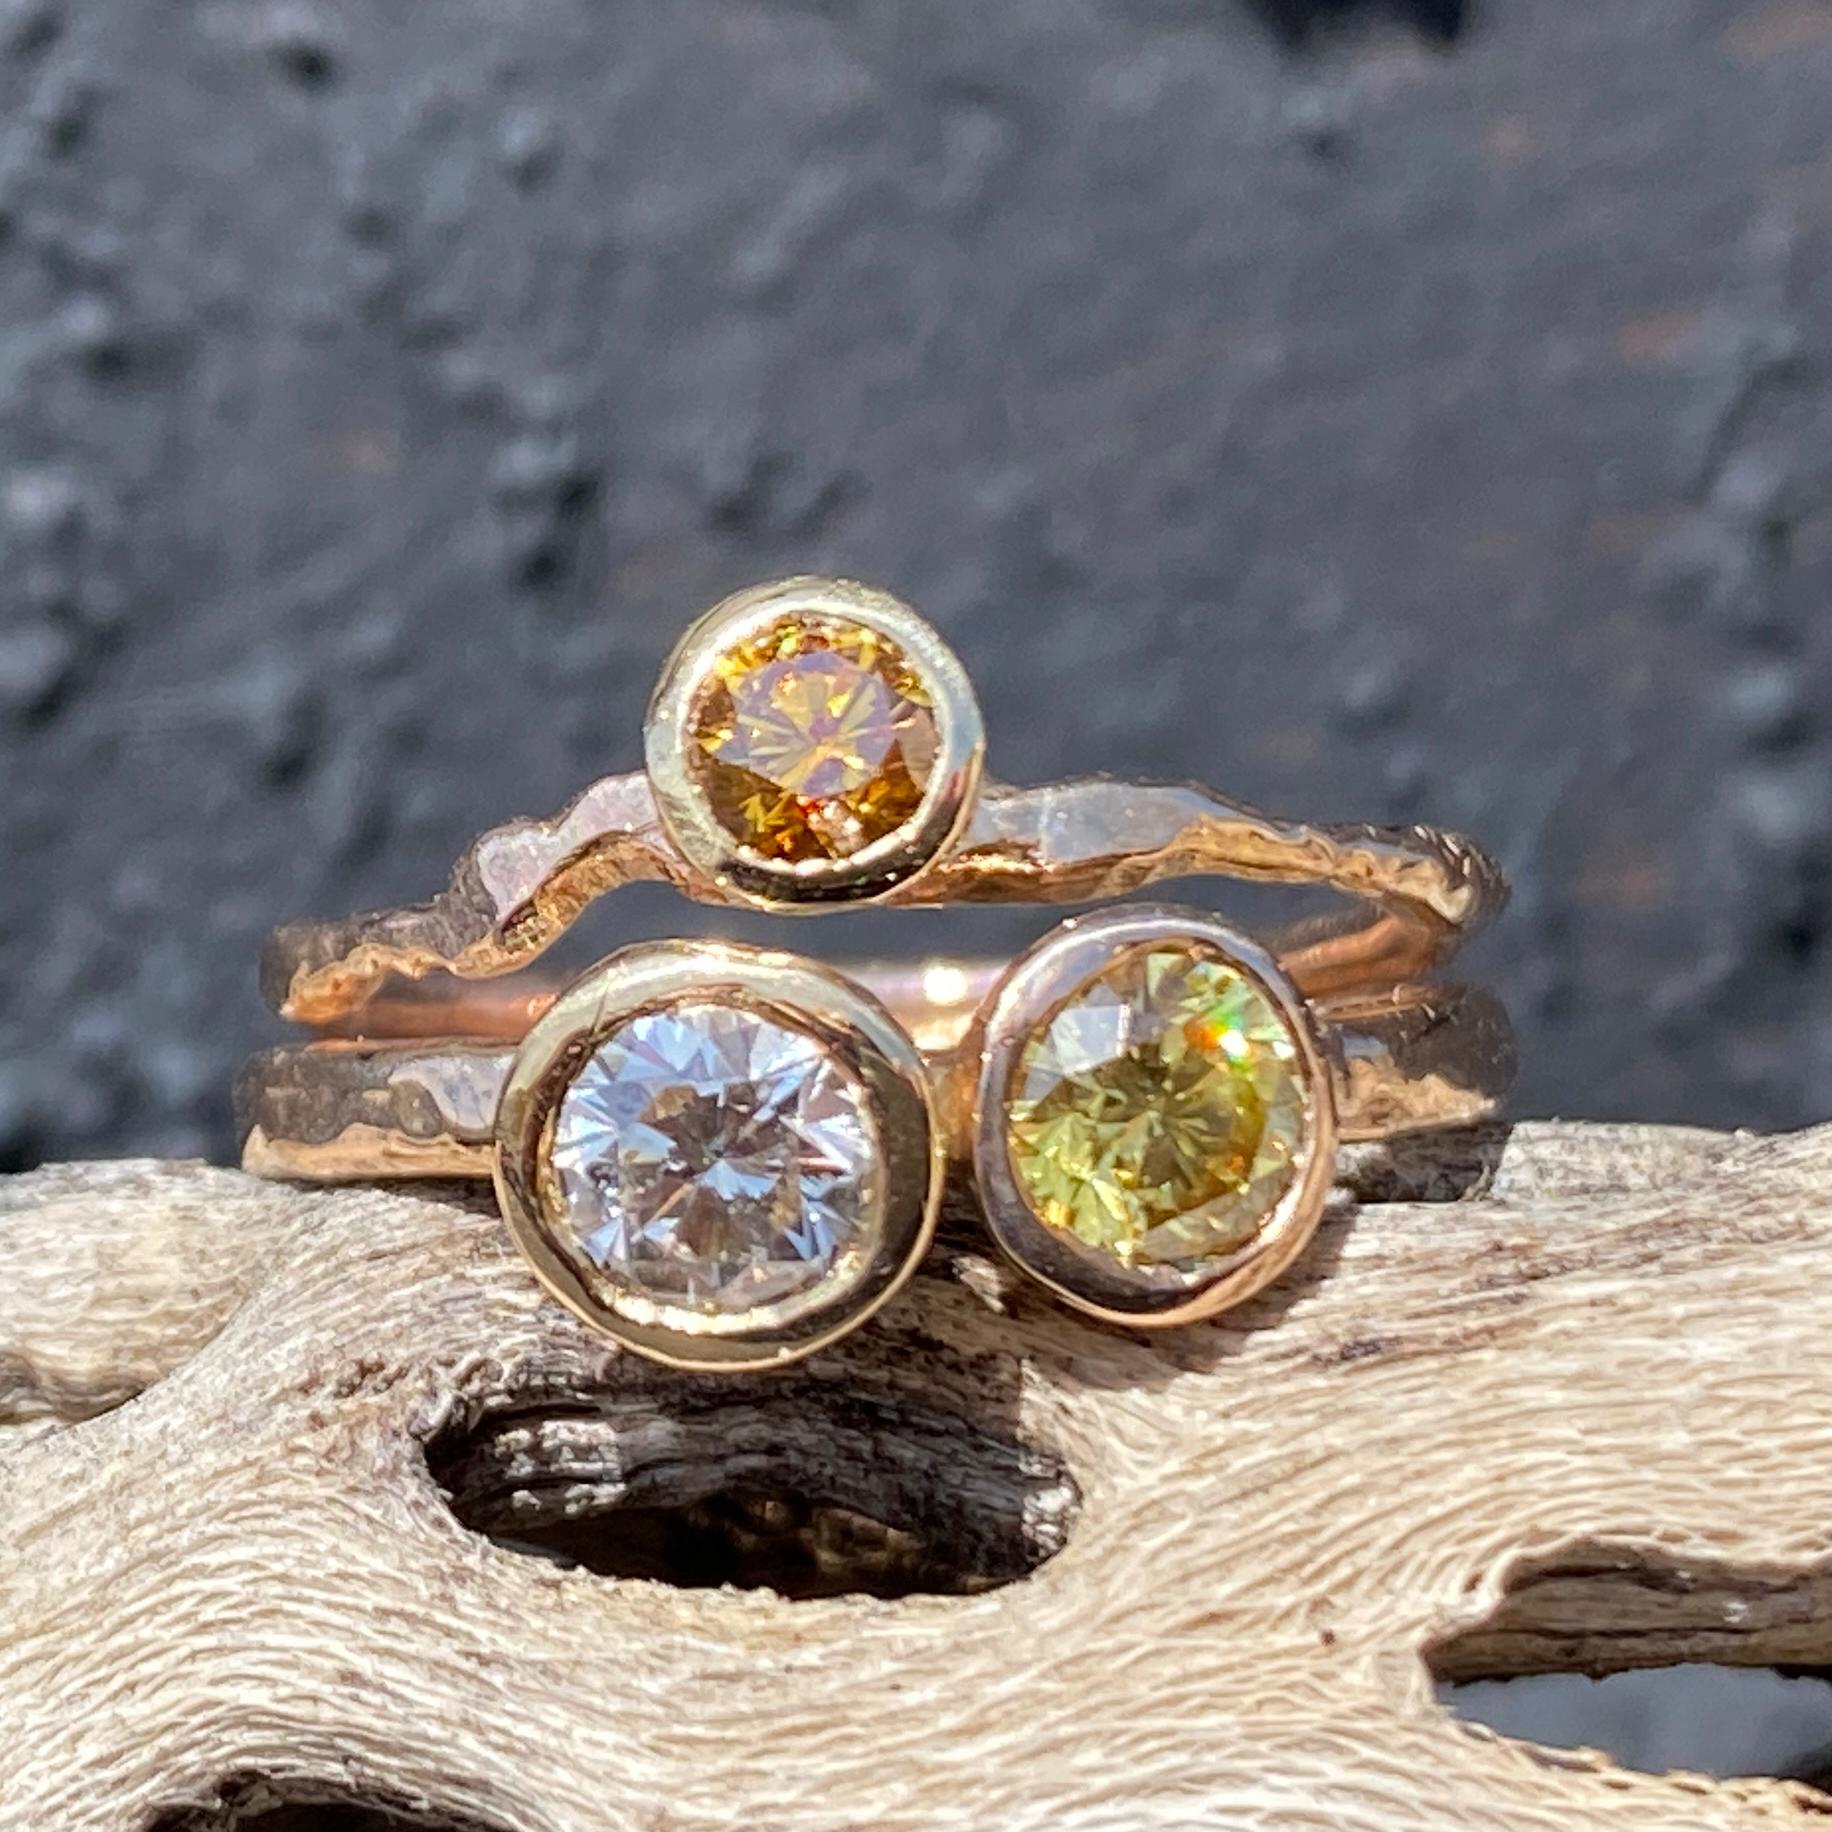 Three beautiful diamonds in white, yellow and brown are set in 